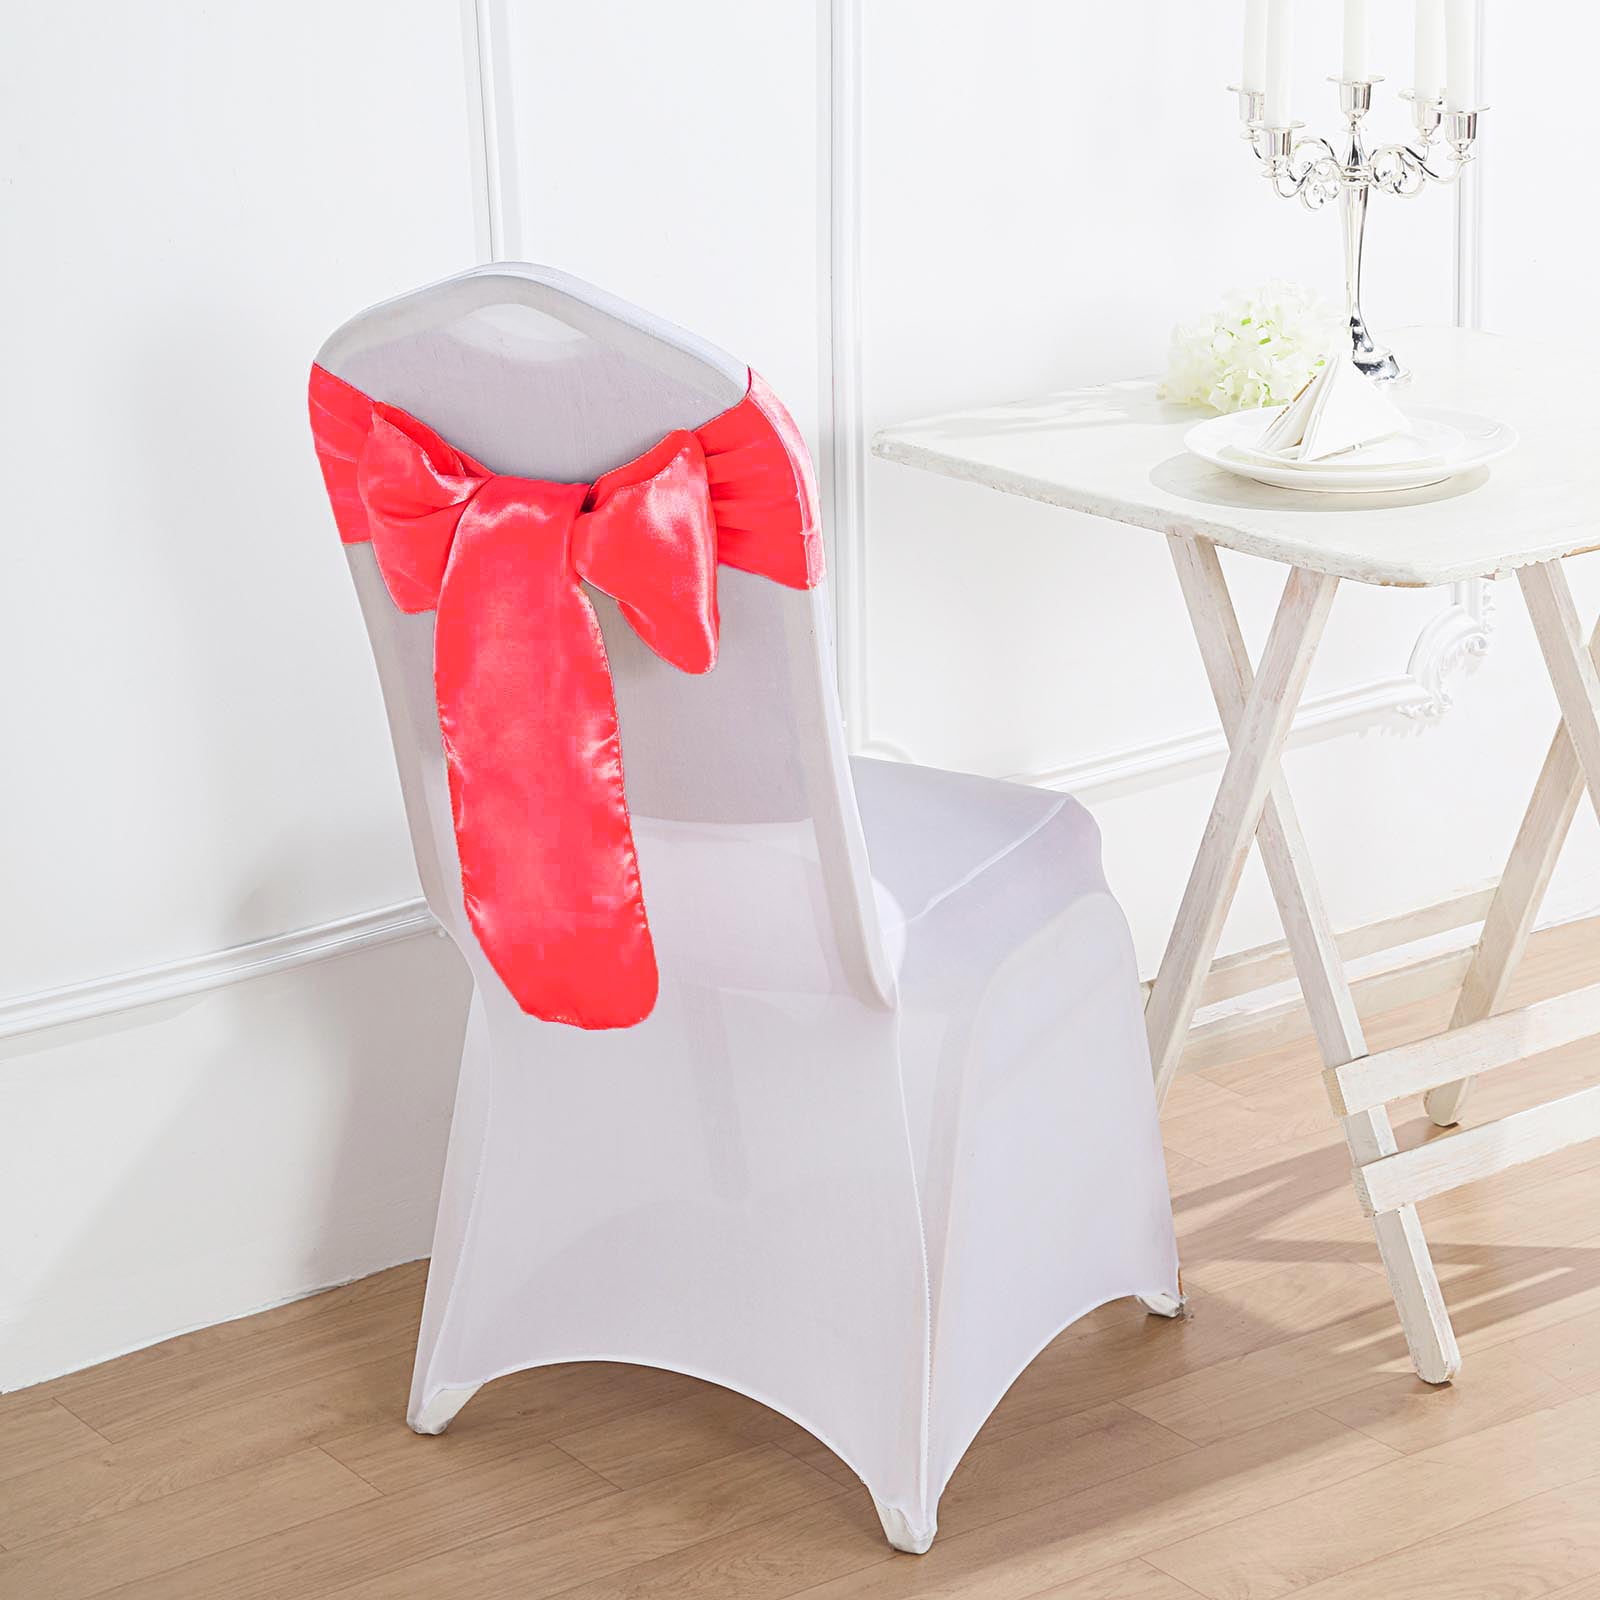 Organza Chair Sash Bows For Wedding Banquet Party Decor Events Free P&P Wine 50 